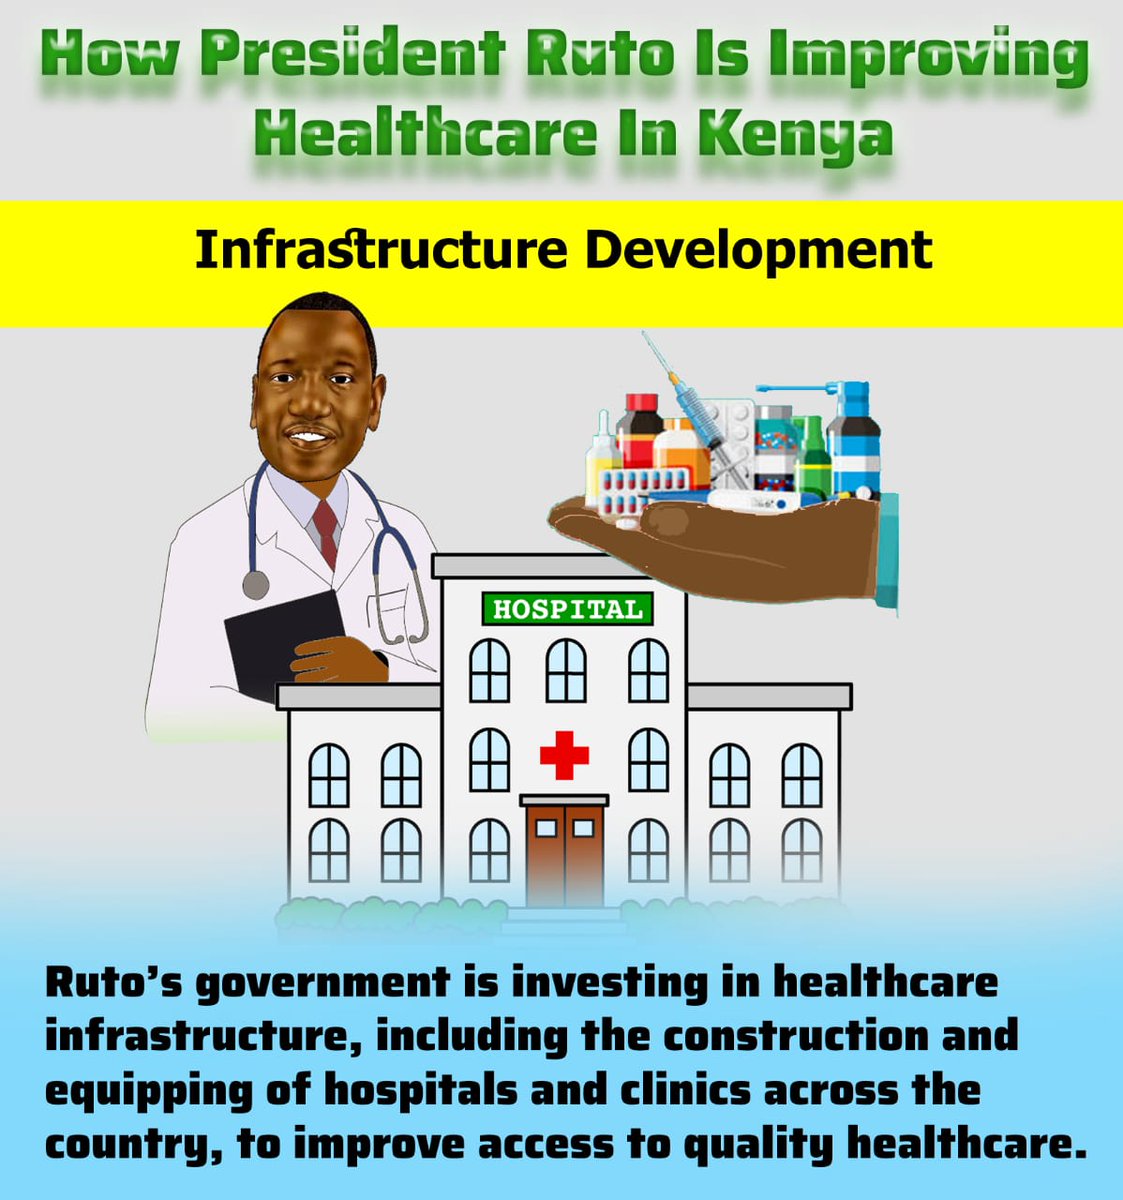 President William Ruto's Administration is investing in healthcare infrastructure including construction and equipment of hospitals.
#RutoHealthcareInitiative

#RutoEmpowers

Afya Nyumbani